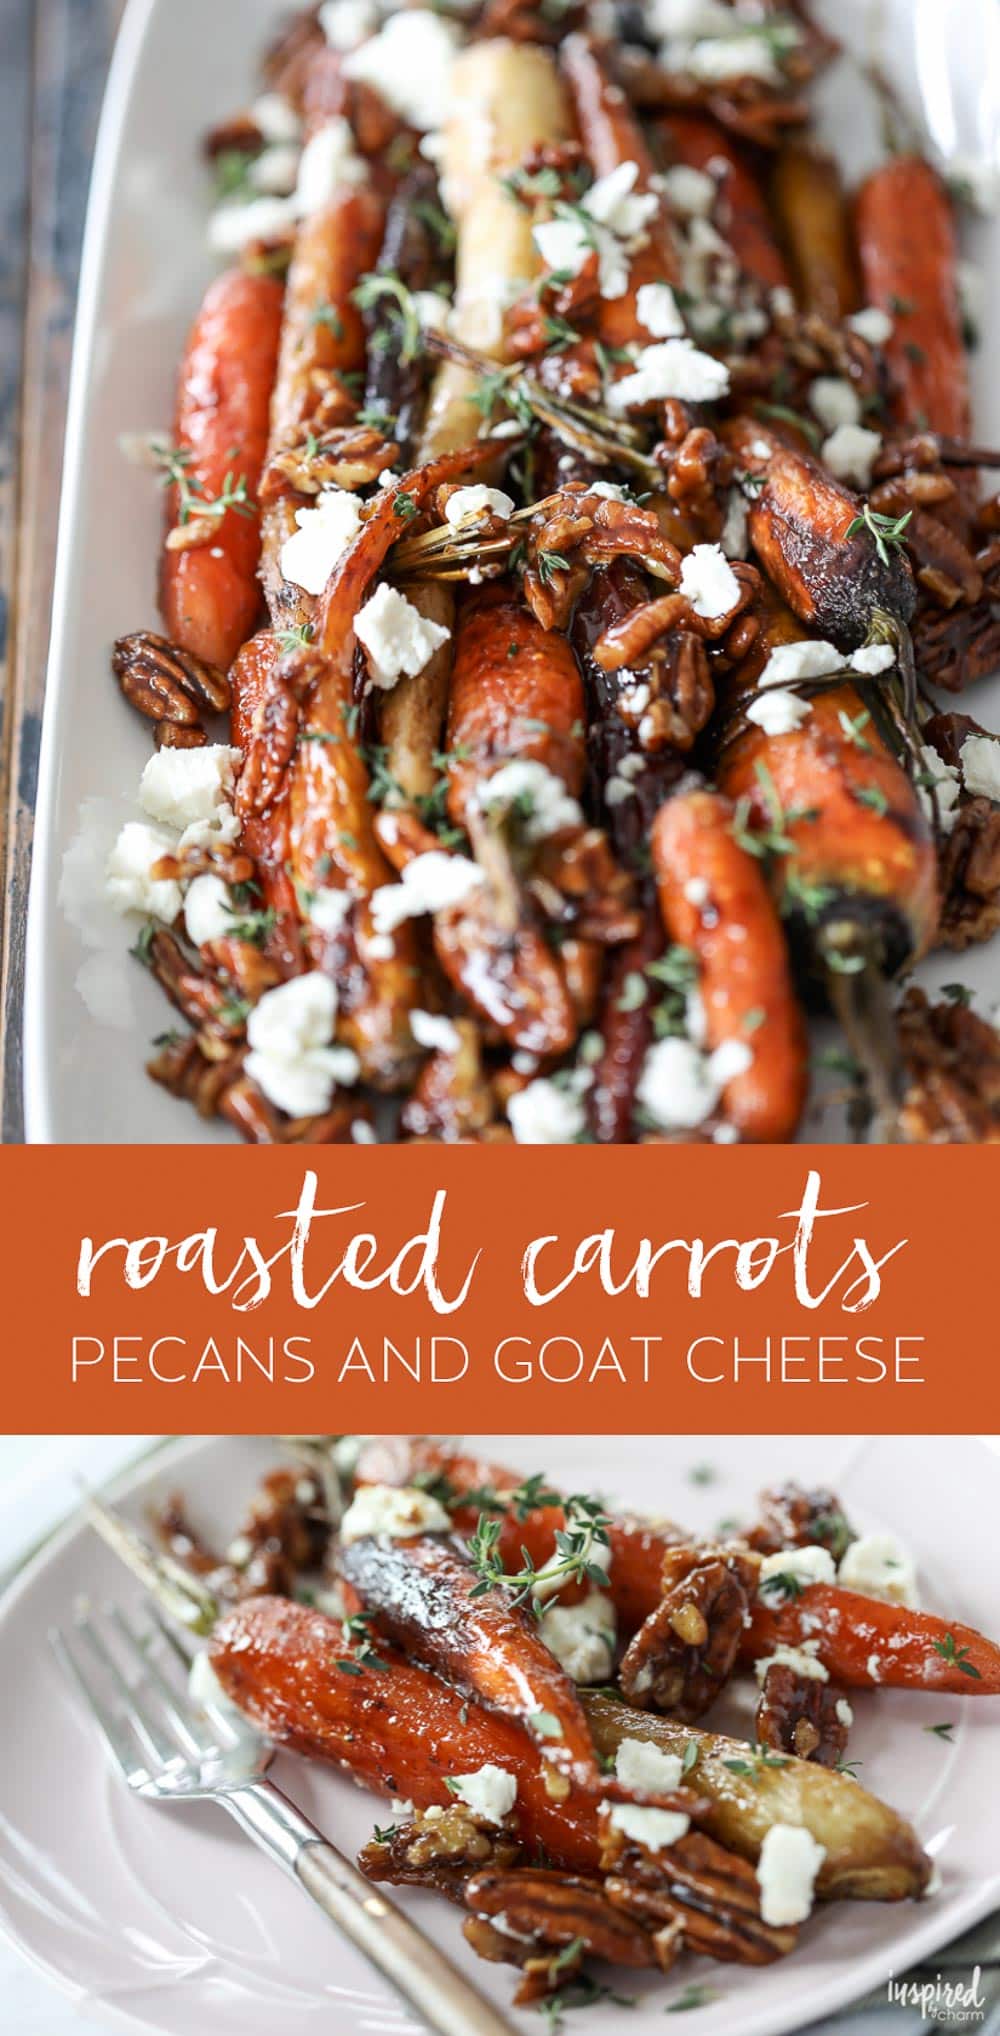 Roasted Carrots with Candied Pecans and Goat Cheese - fall Thanksgiving side dish recipes #recipe #fall #roasted #carrots #glazed #goatcheese #pecans